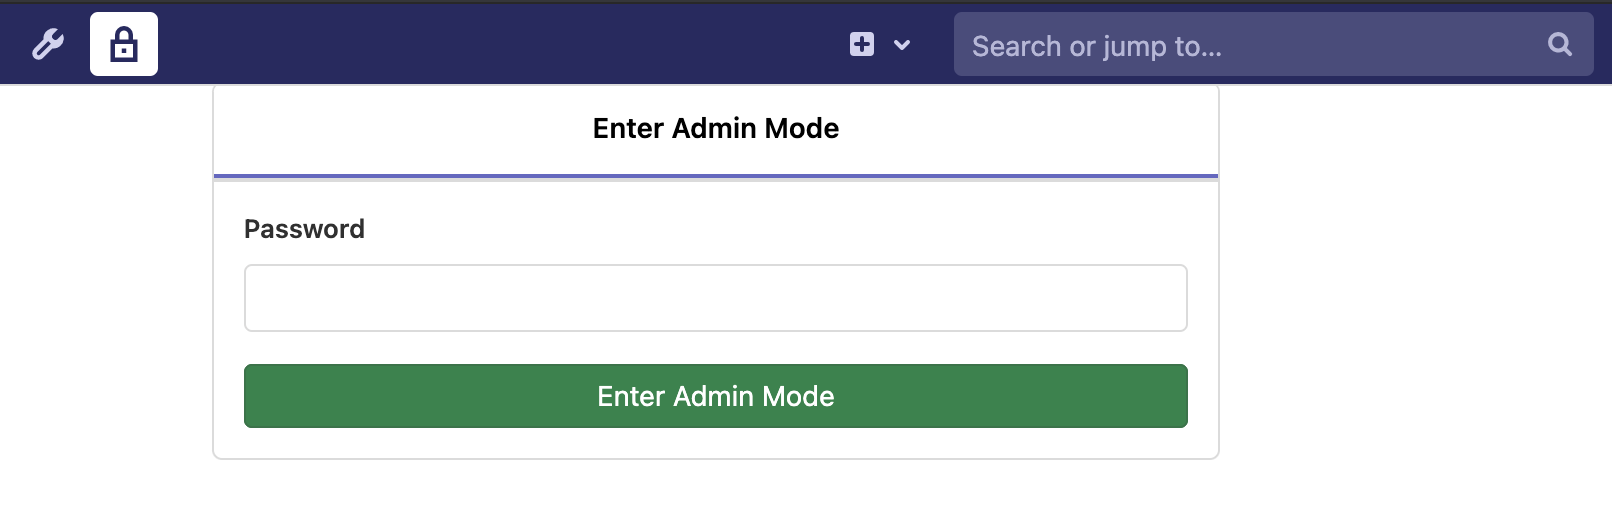 Re-authenticate for GitLab administration with Admin Mode